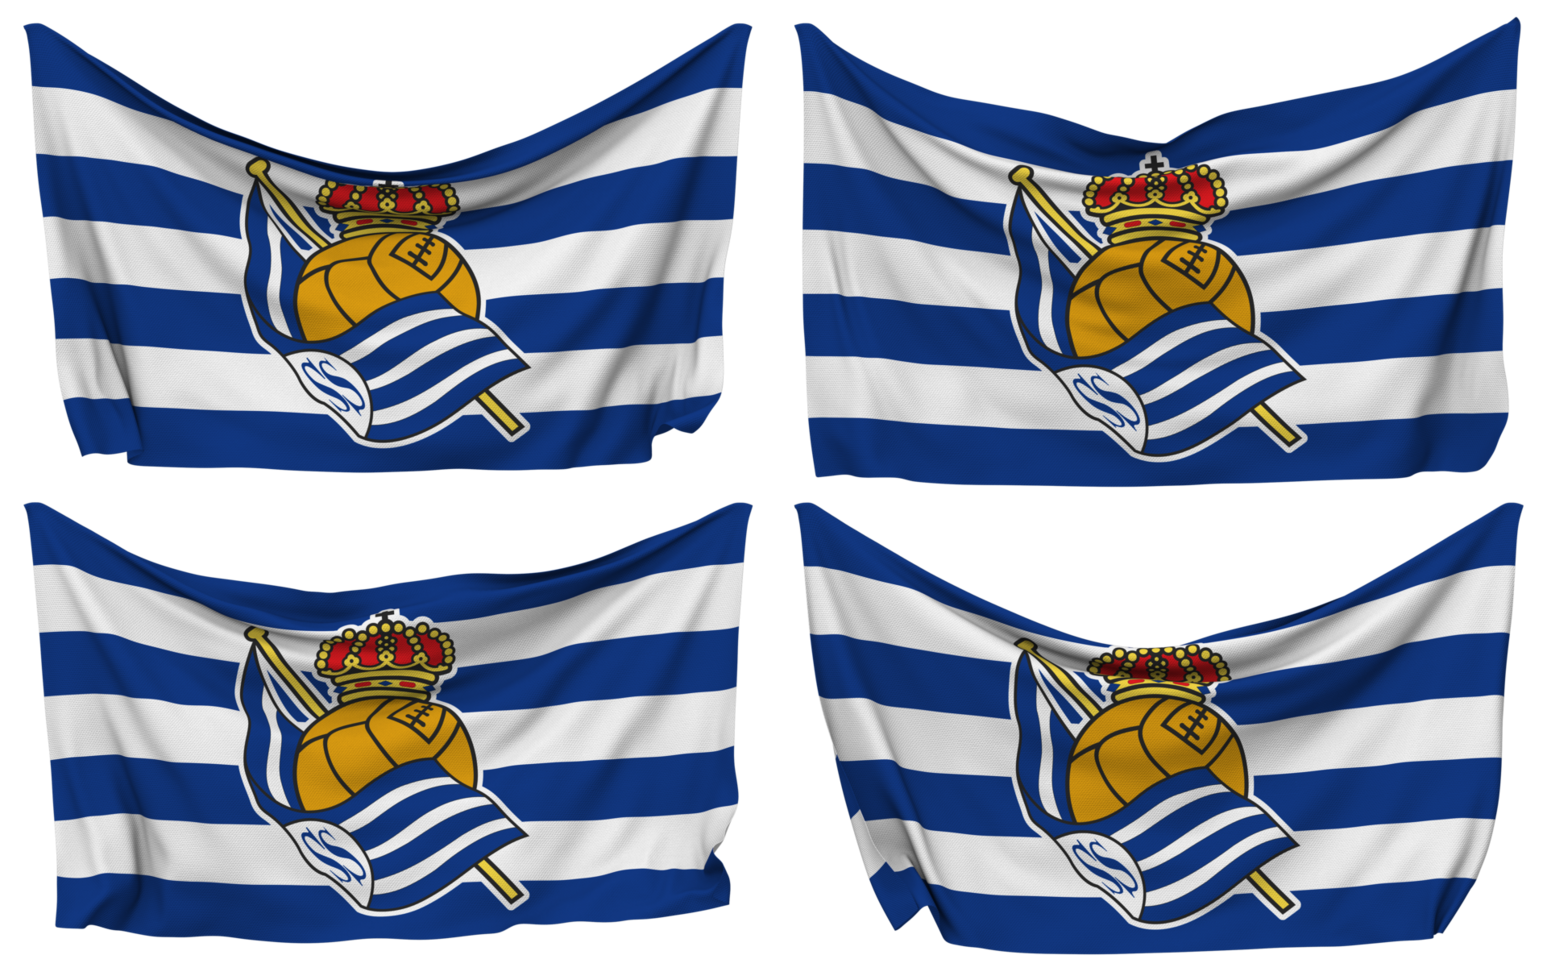 Real Sociedad Football Club Pinned Flag from Corners, Isolated with Different Waving Variations, 3D Rendering png